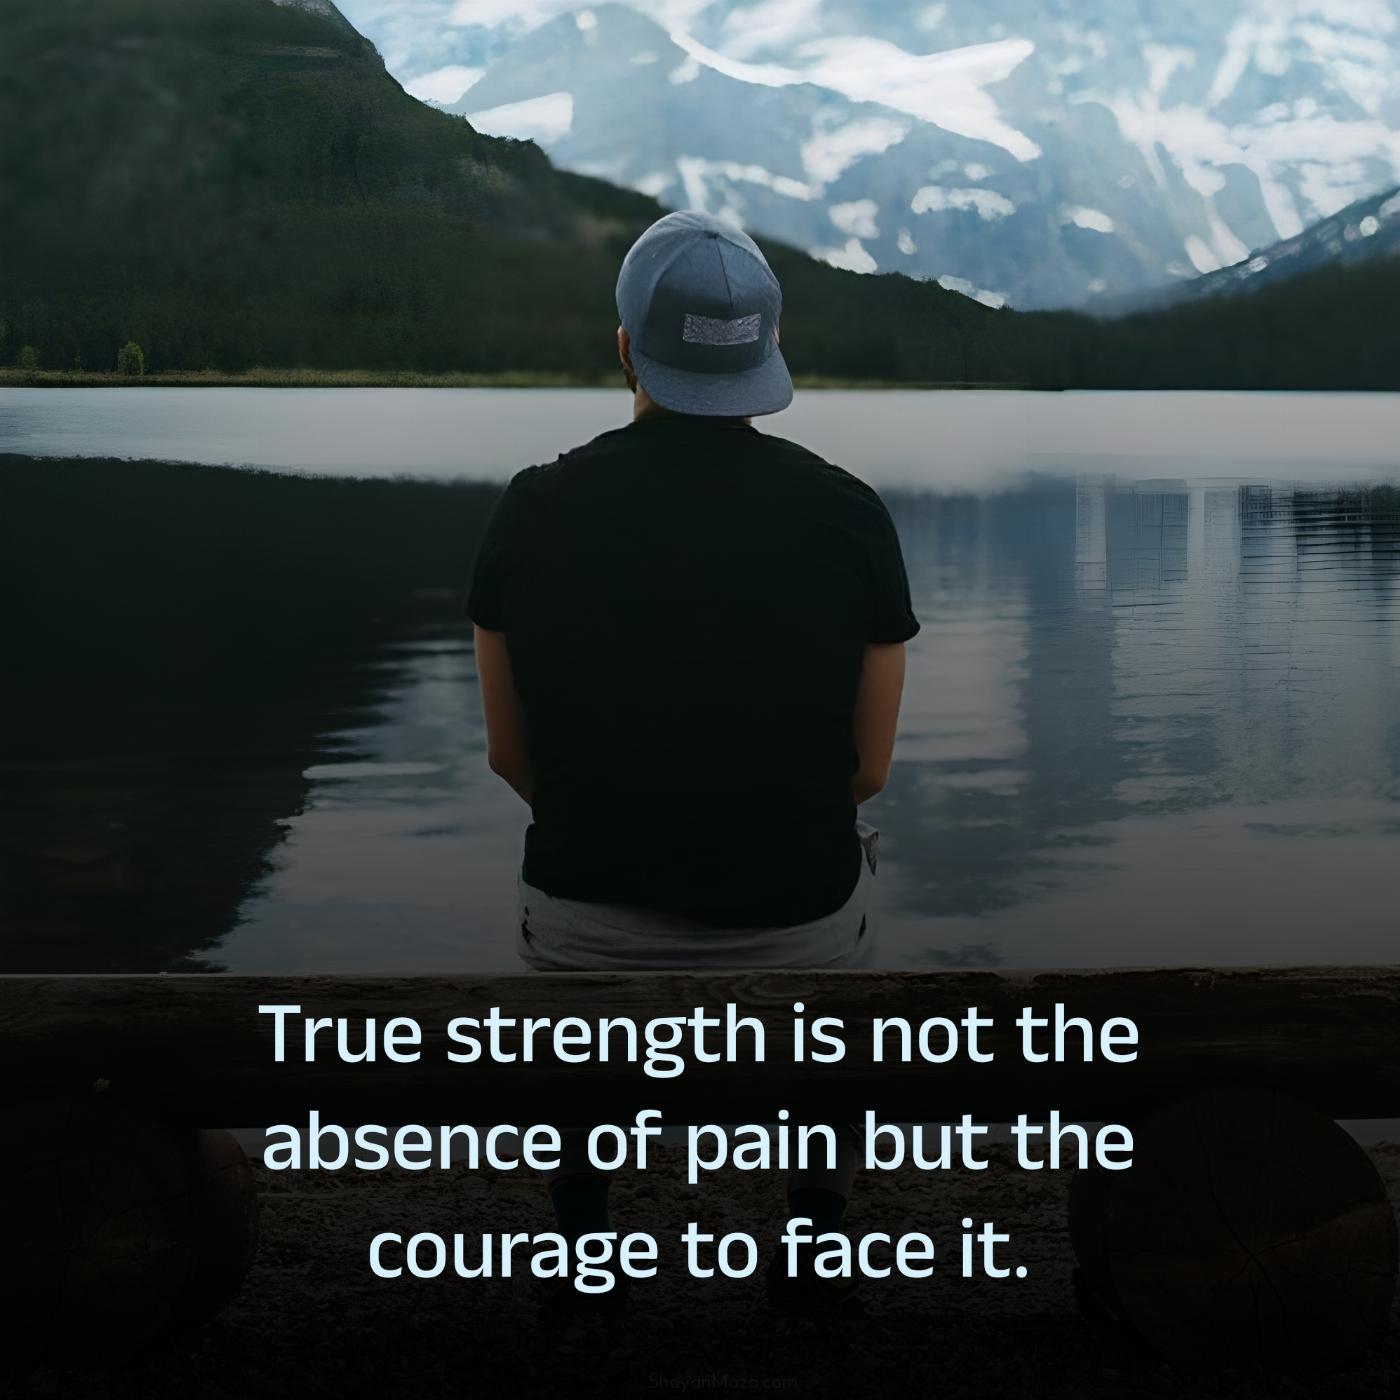 True strength is not the absence of pain but the courage to face it